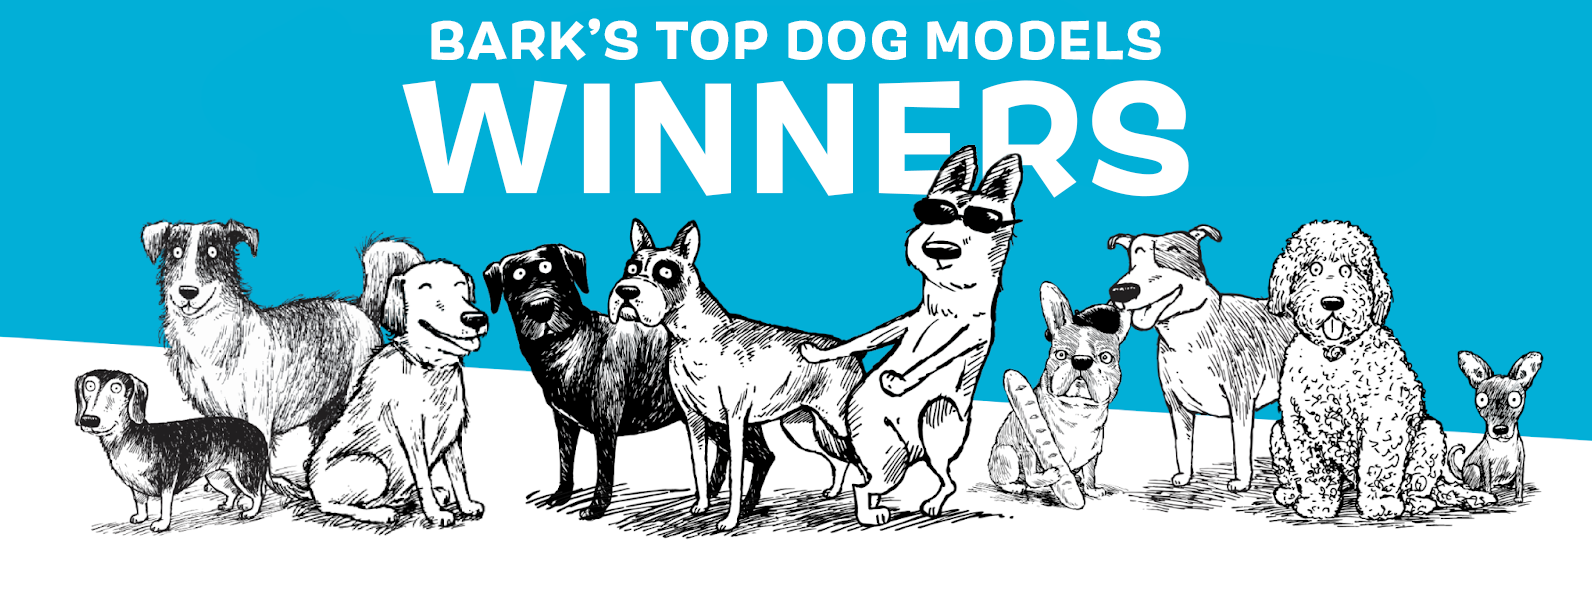 BARK Announces Winners of Next Top Dog Models Contest